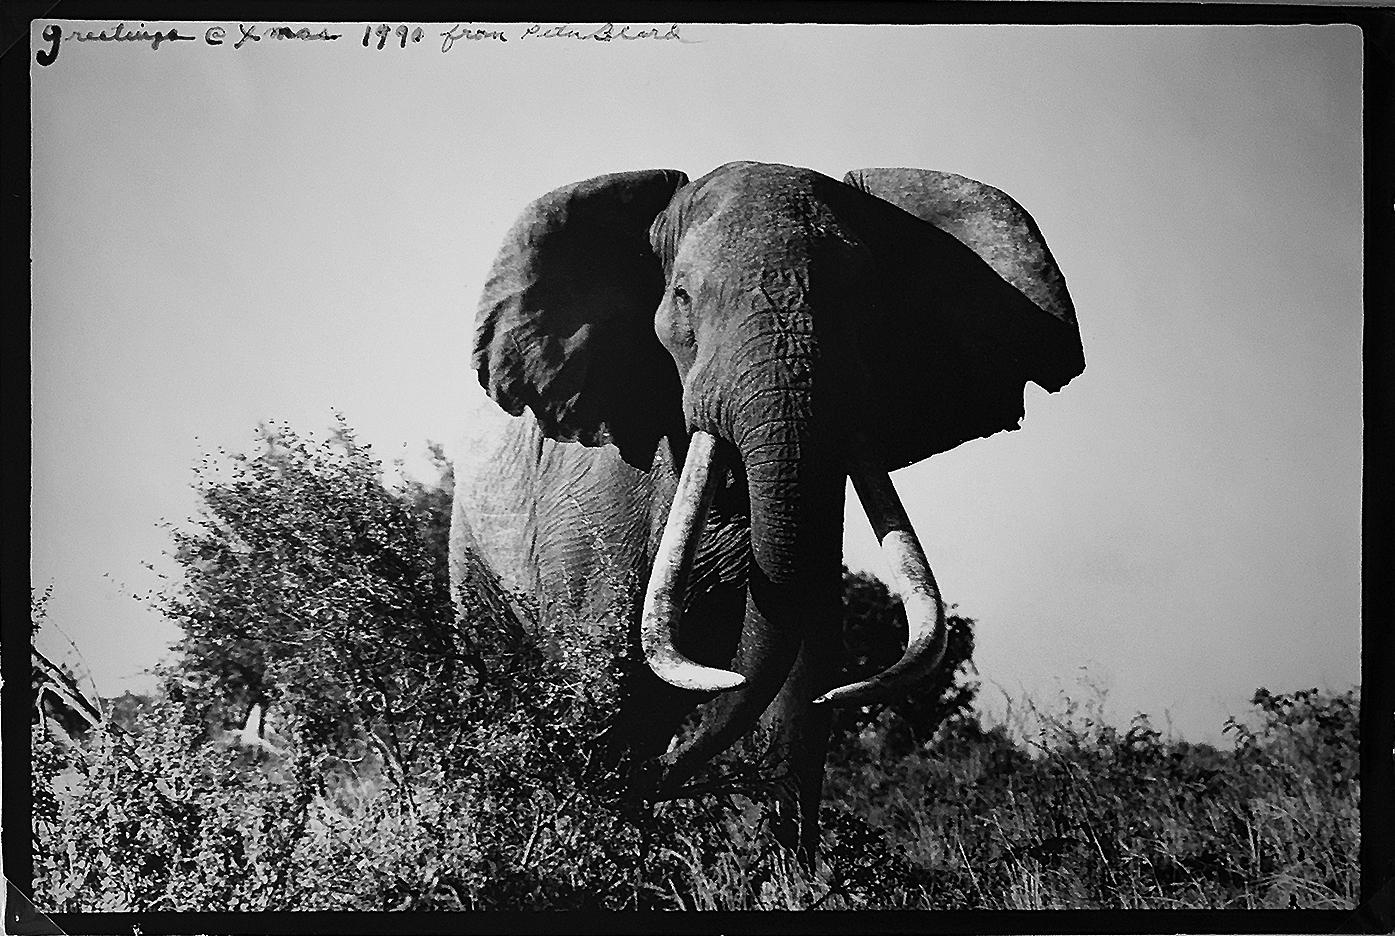 Peter Beard Black and White Photograph - Large Tusker, Black and White Nature Photography of Elephant in Kenya, Africa